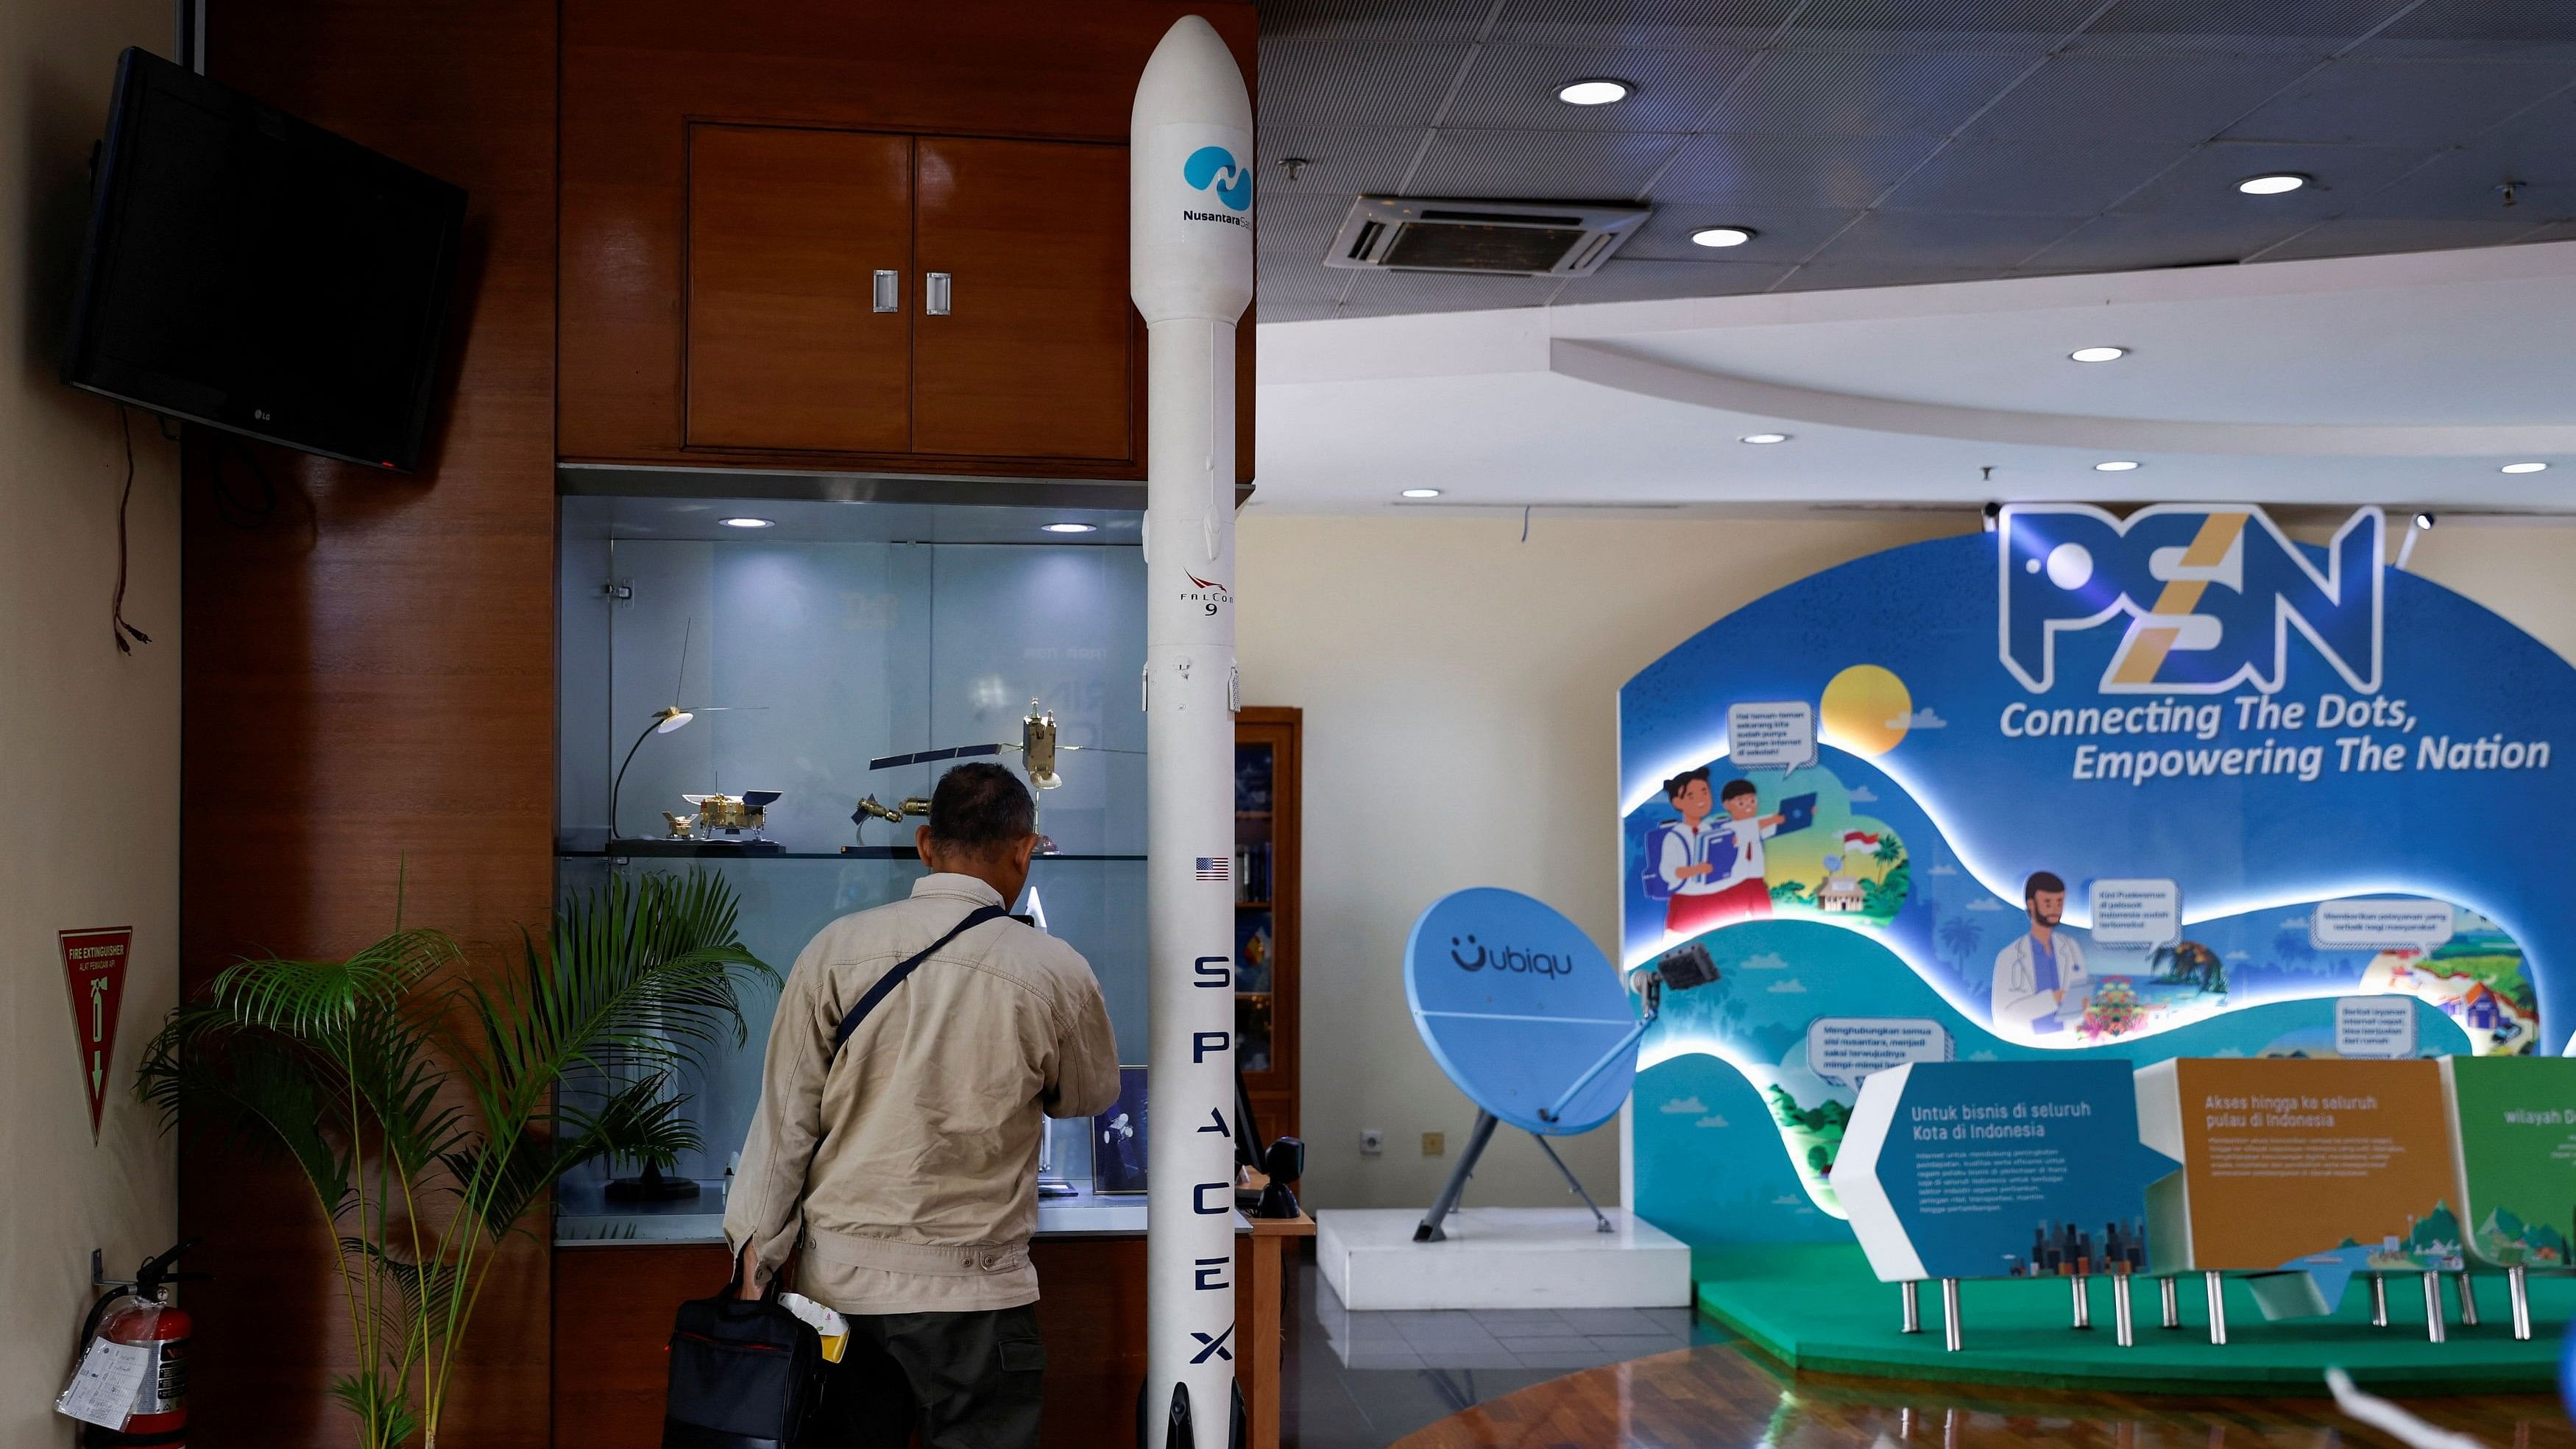 <div class="paragraphs"><p>A man stands next to a model of SpaceX’s Falcon 9 rocket, that launched the 4.1 tonne Nusantara Satu broadband satellite in February 2019, at the office of Pasifik Satelit Nusantara, an Indonesia’s satellite-based telecommunication firm, in Jakarta, Indonesia.</p></div>